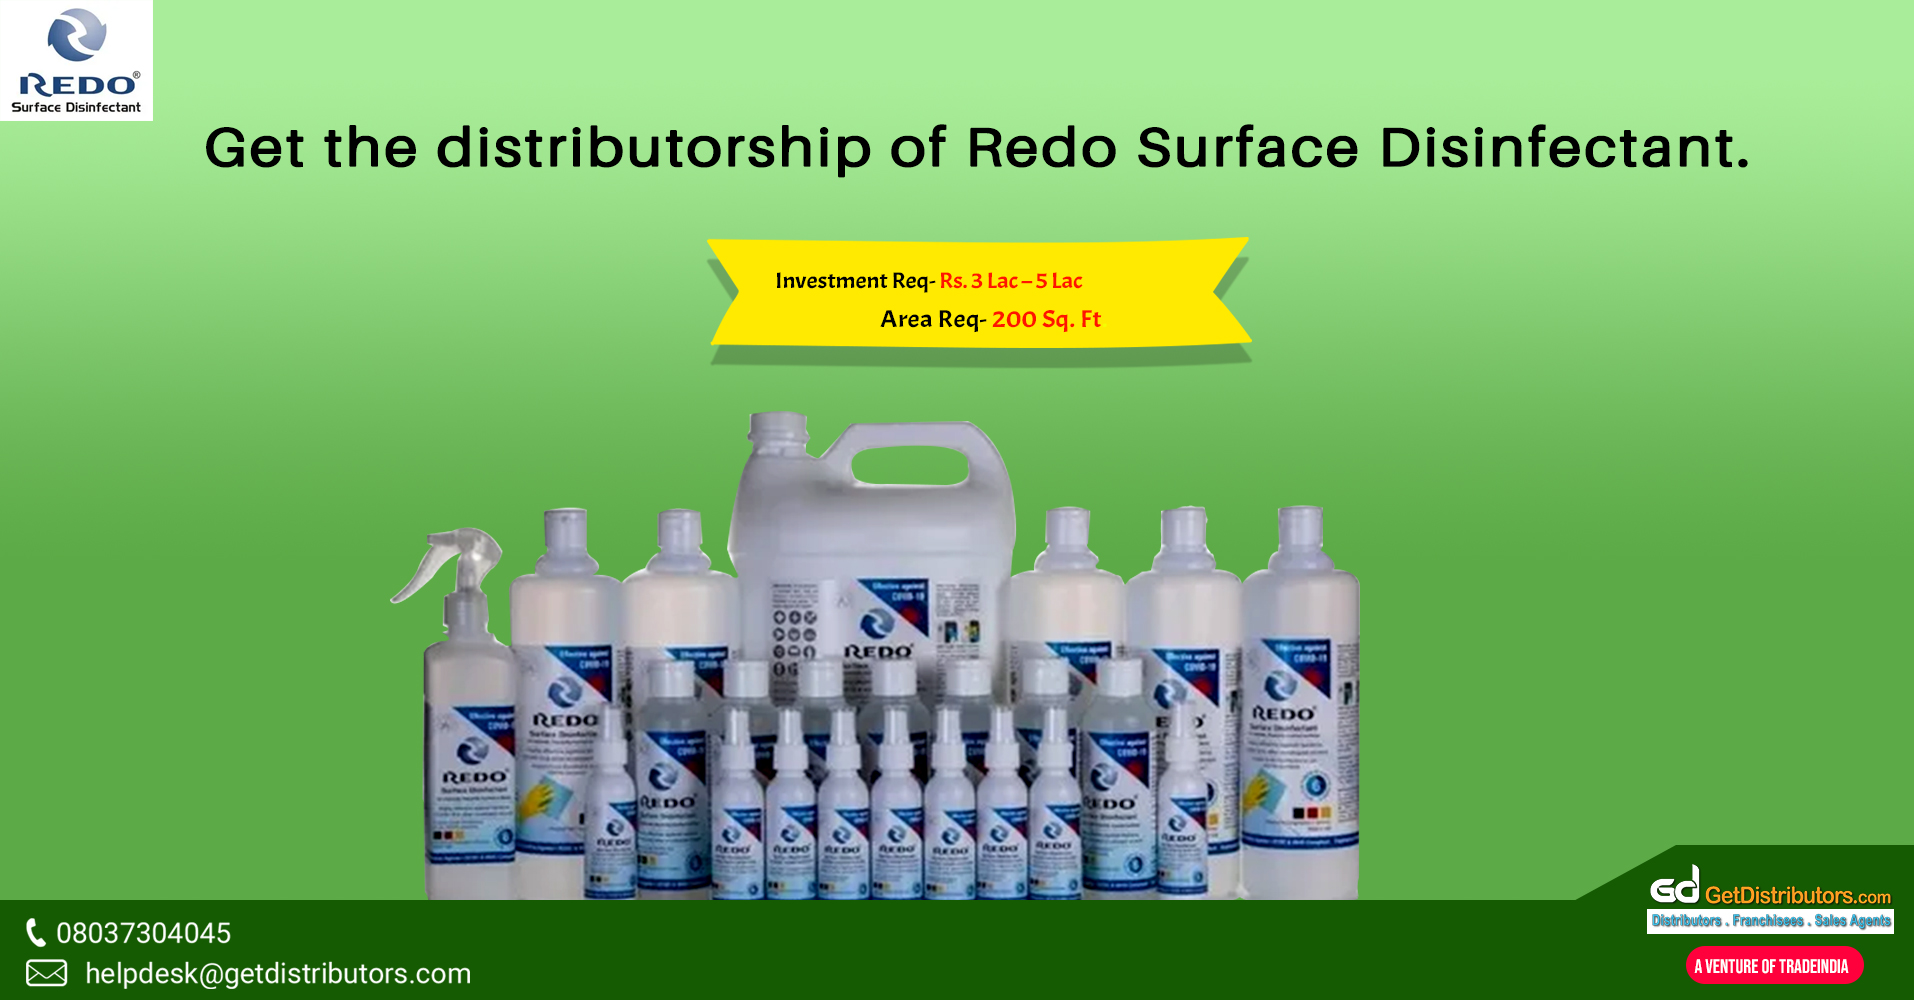 Superior quality surface disinfectants for distribution